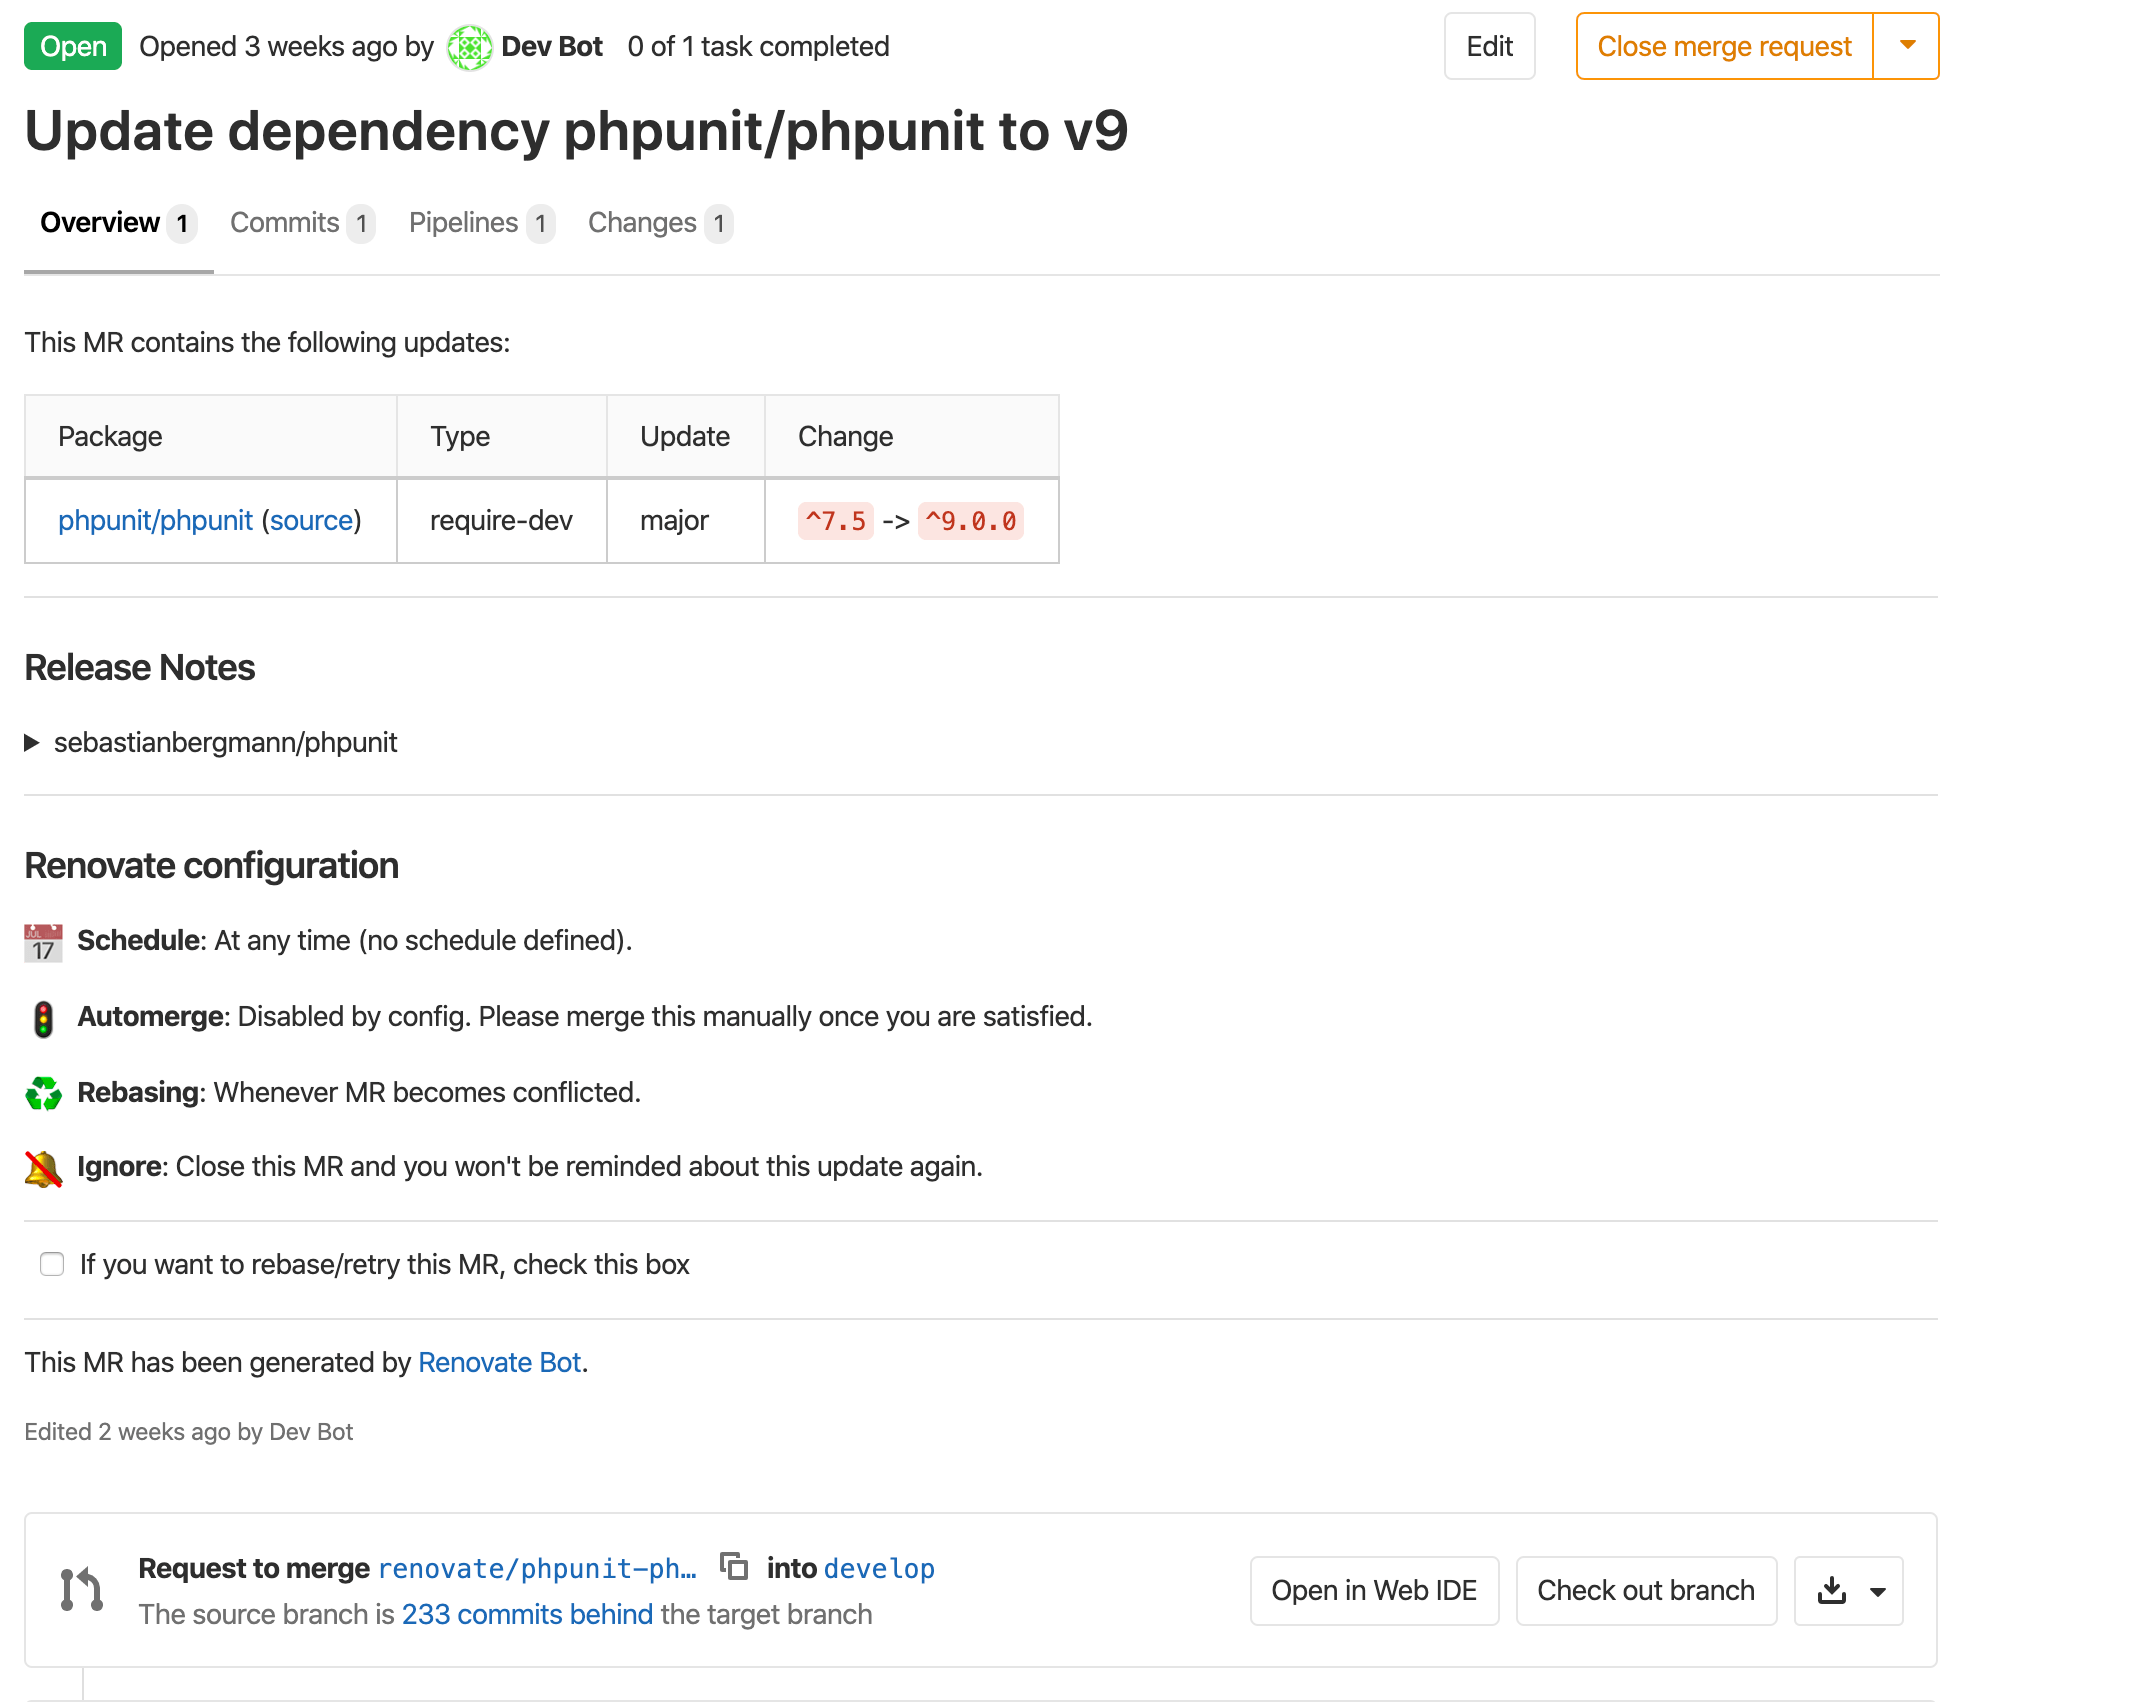 Track your development dependencies using Renovate and Gitlab